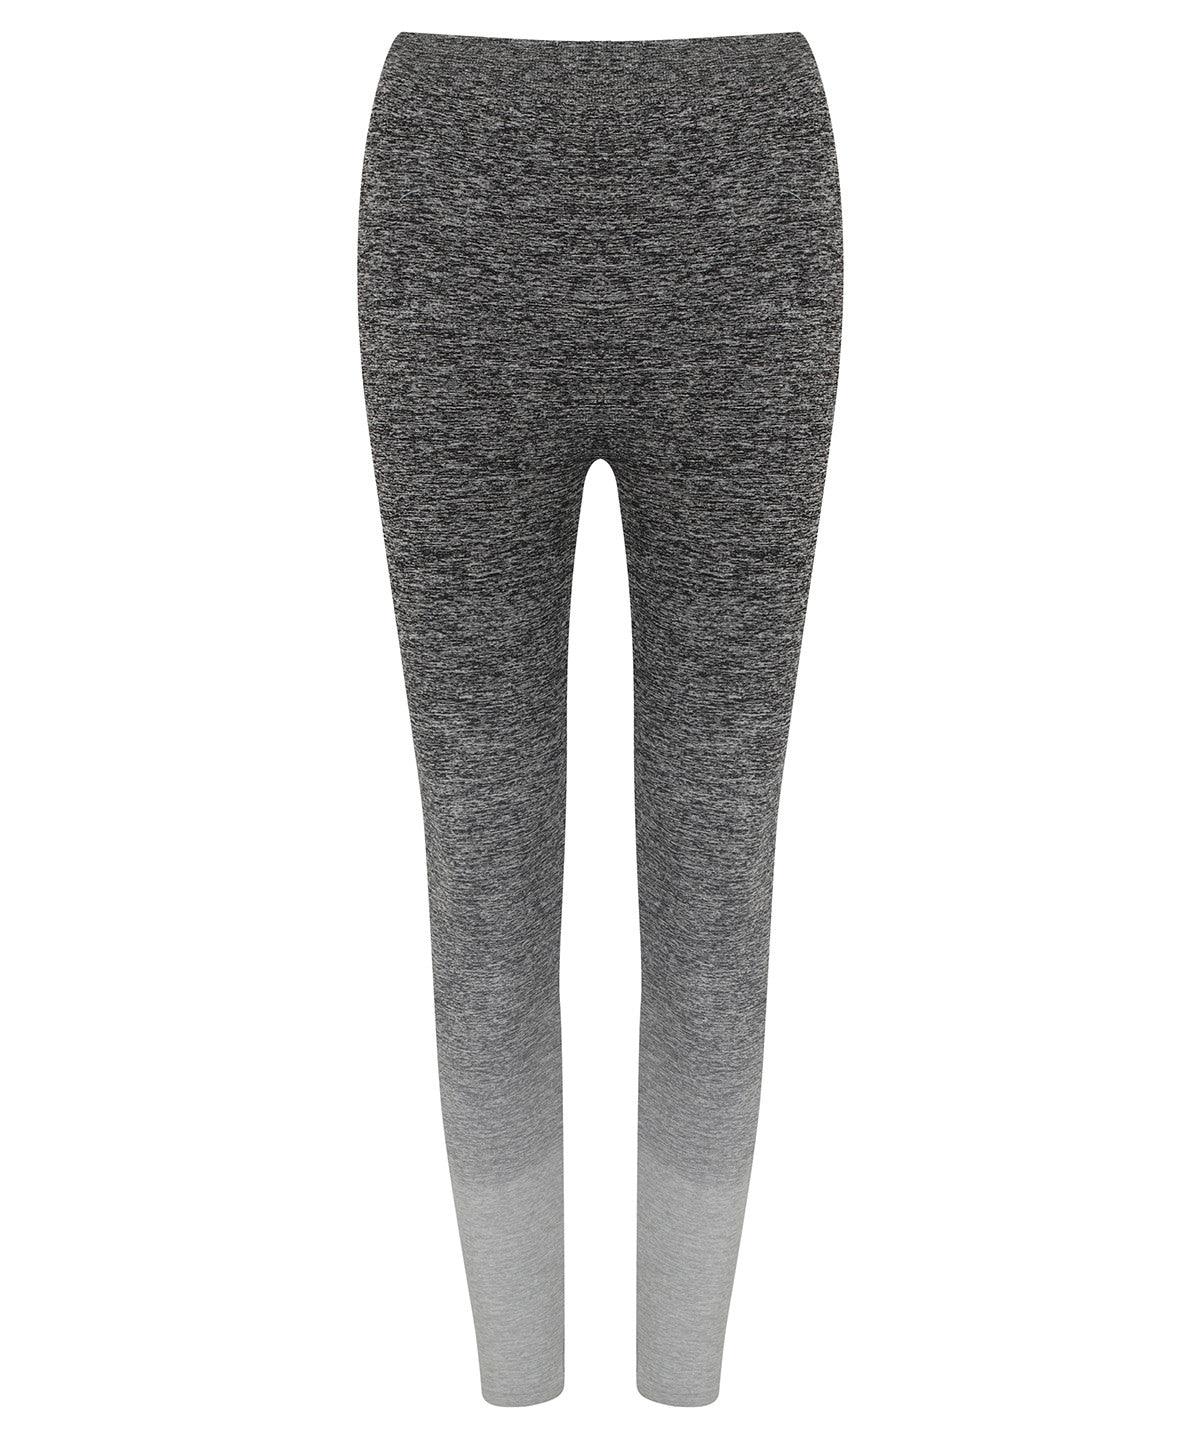 Dark Grey/Light Grey Marl - Women's seamless fade out leggings Leggings Tombo Activewear & Performance, Athleisurewear, Fashion Leggings, Leggings, Must Haves, On-Trend Activewear, Sports & Leisure, Trousers & Shorts, Women's Fashion Schoolwear Centres